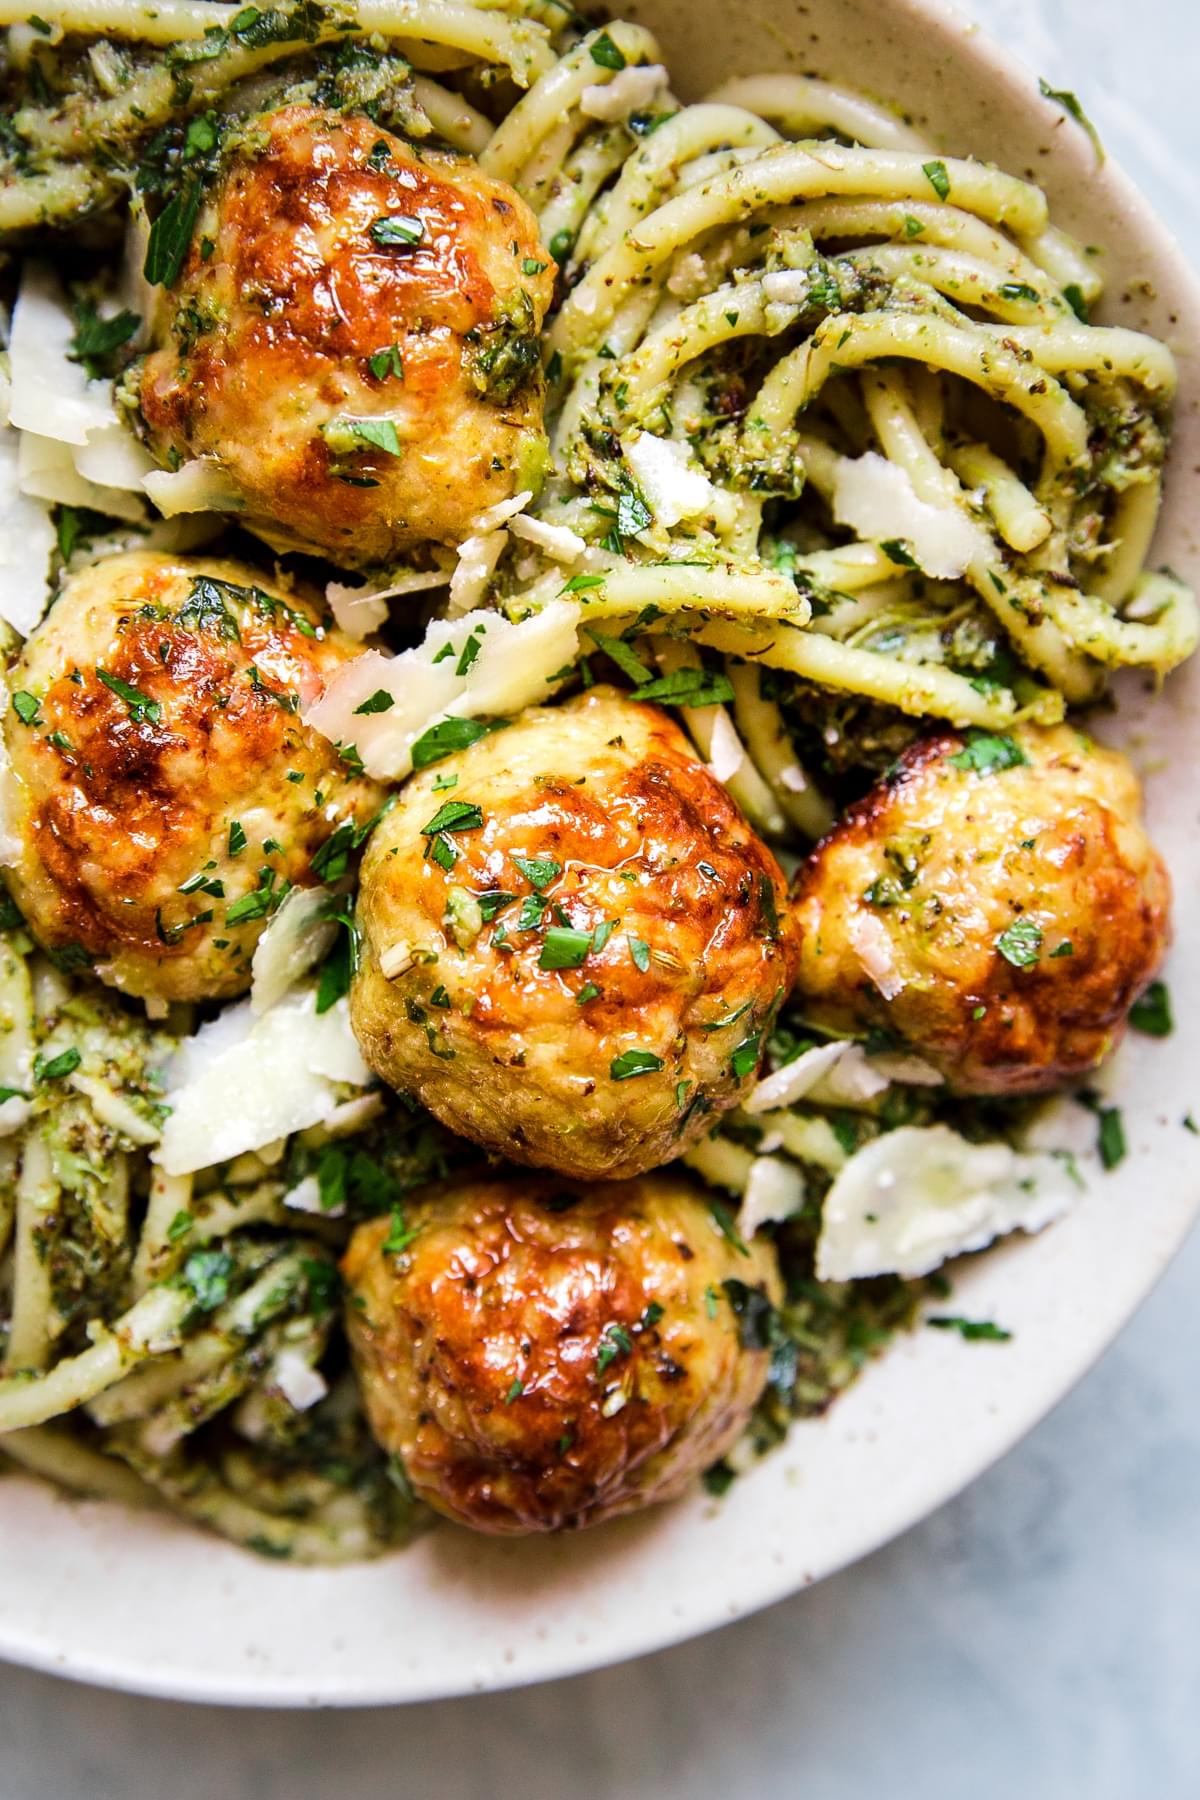 baked chicken meatballs with broccoli pesto pasta in white bowl